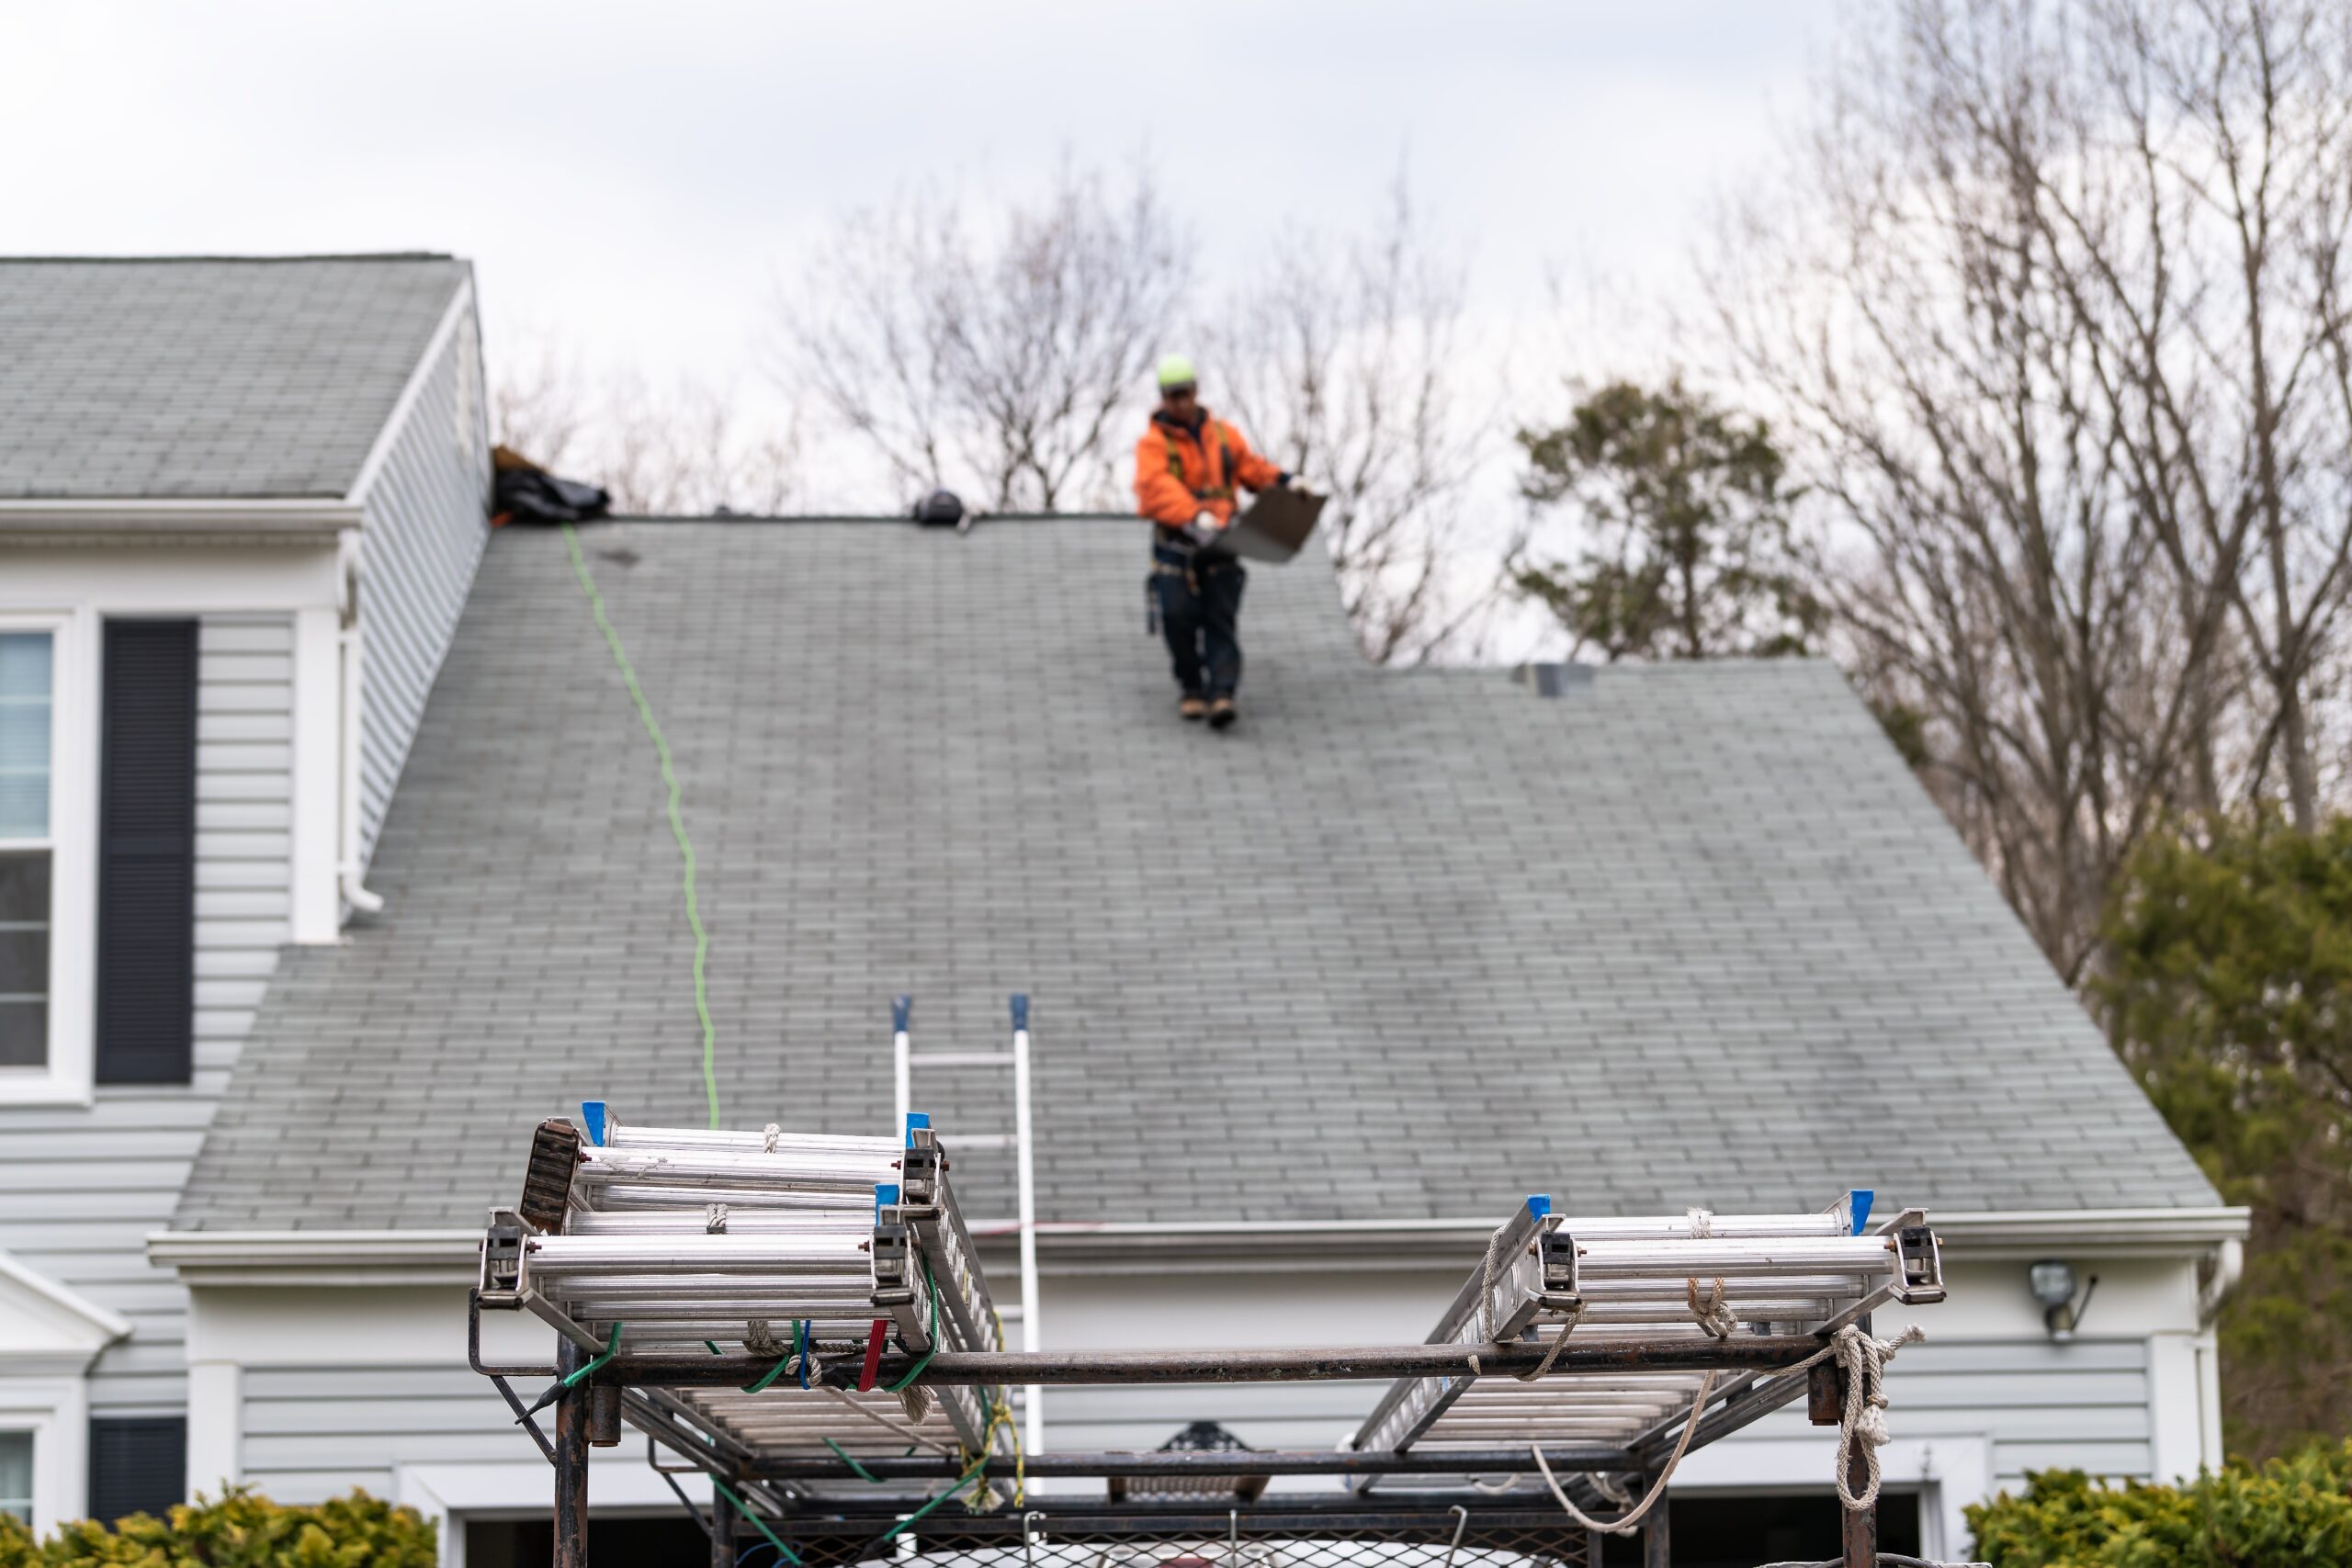 Roofer in the Gainesville, GA area that replaces roof, repairs roof and installs new roofs on residential and commercial buildings.